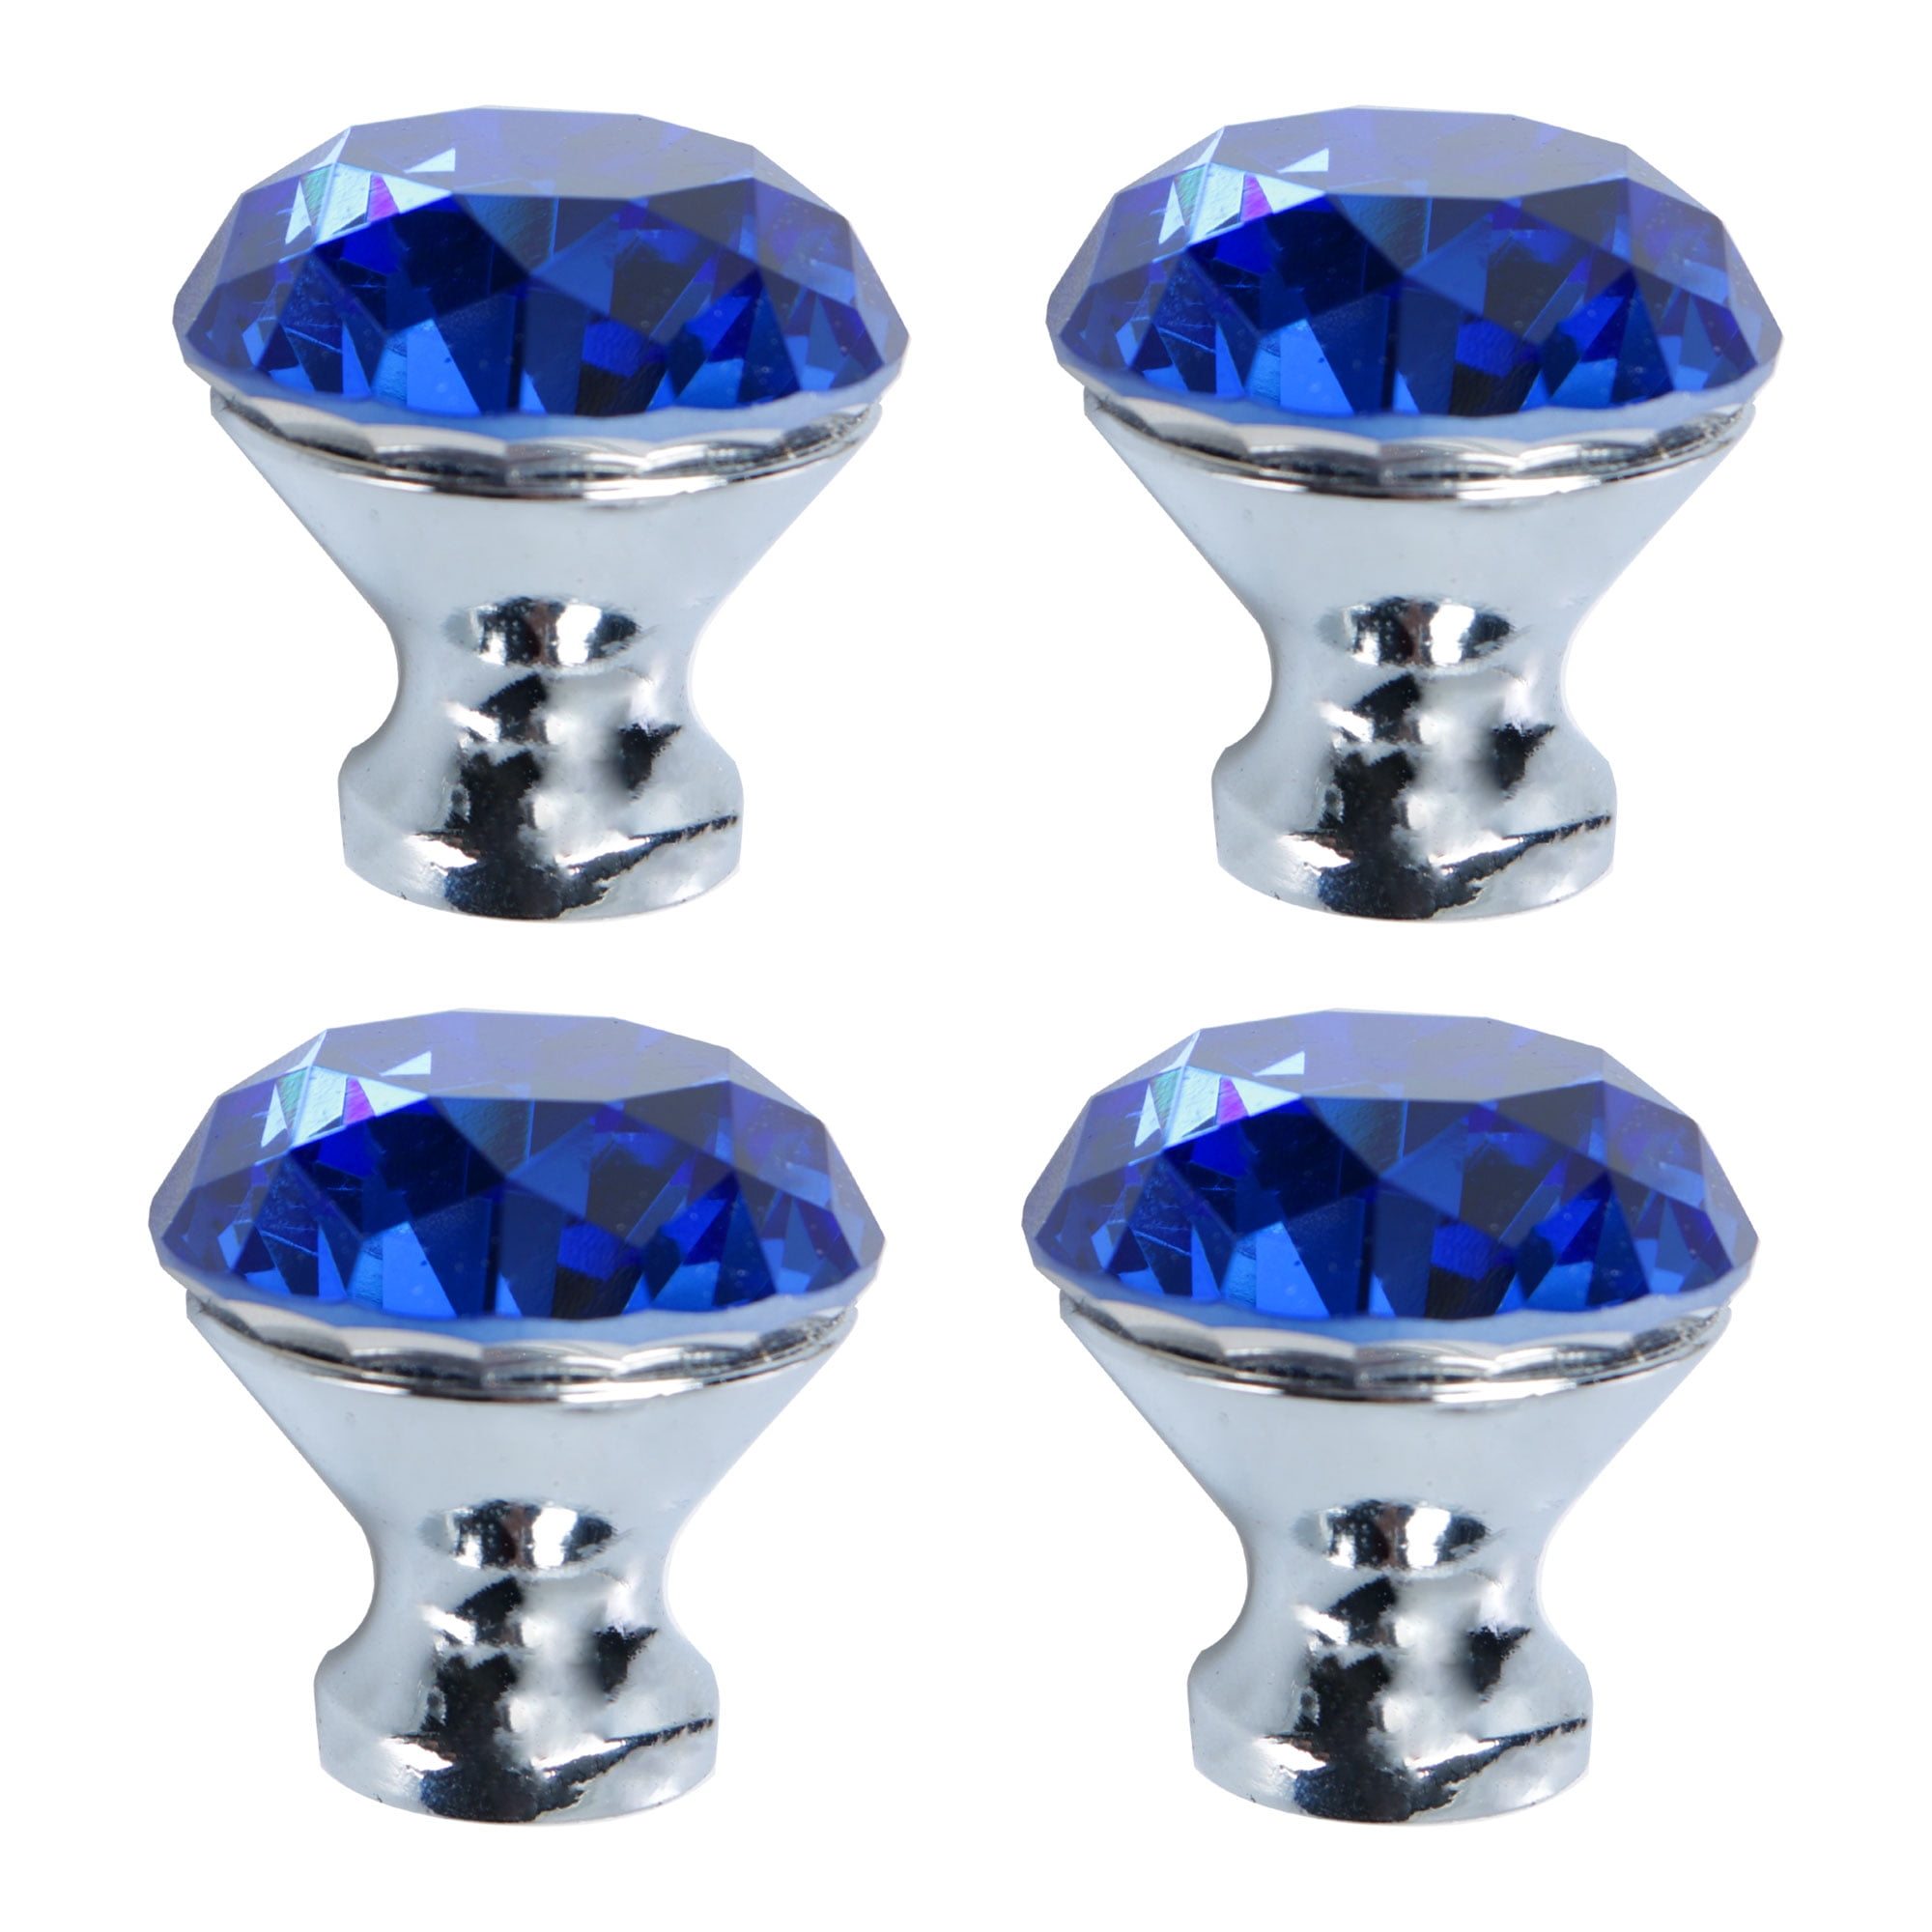 Crystal Knobs Wardrobe Dresser Door Knobs Pull Handle for Home Kitchen Office Cupboard 4pcs Blue